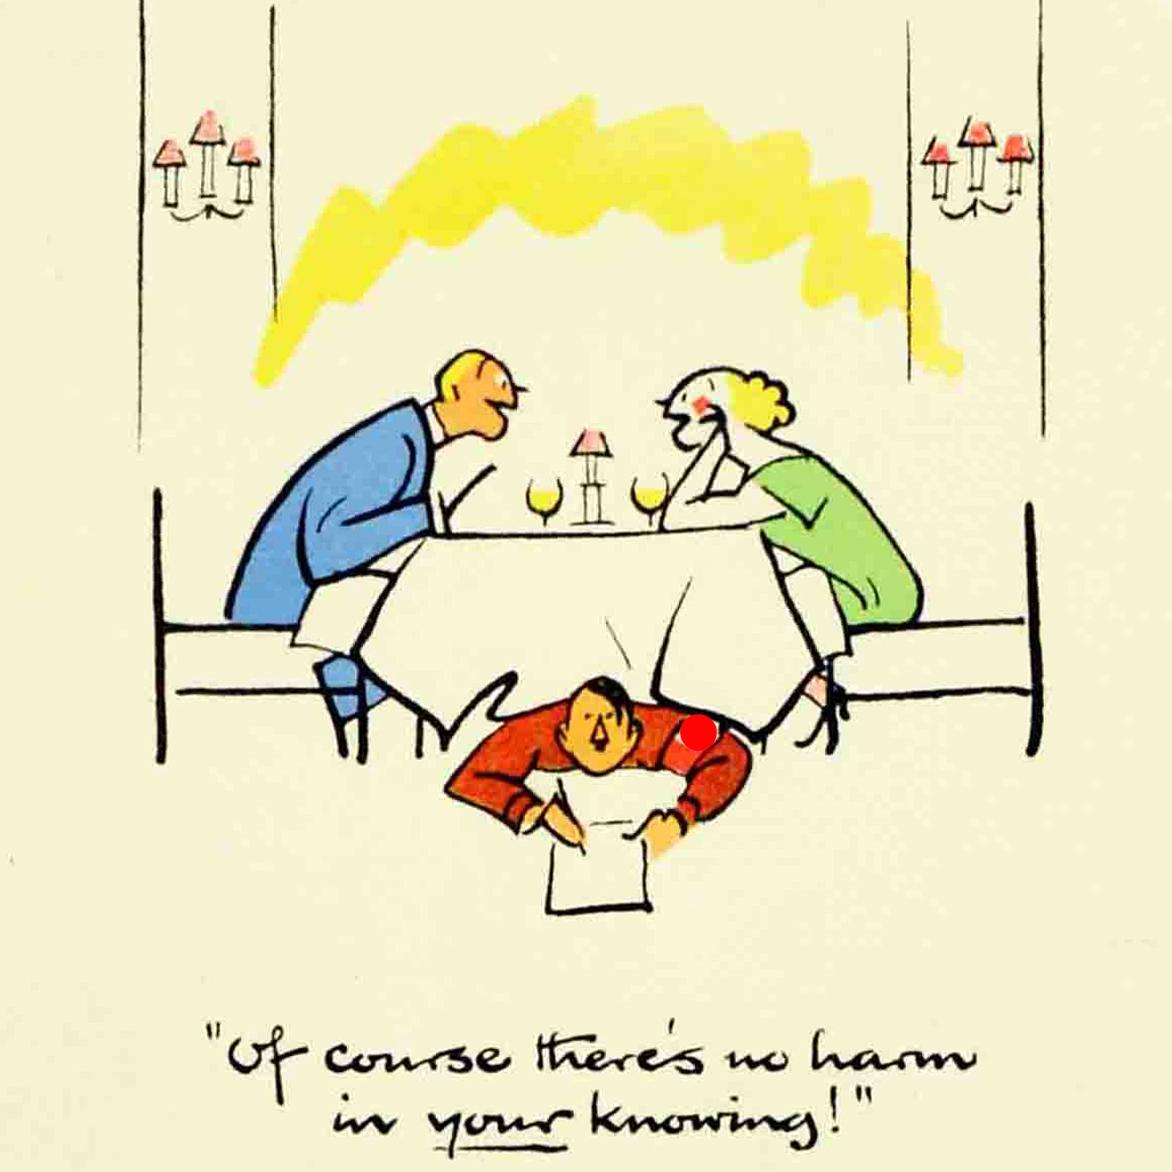 Original Vintage WWII Poster Careless Talk Costs Lives No Harm Hitler Fougasse - Print by Fougasse (Cyril Kenneth Bird)